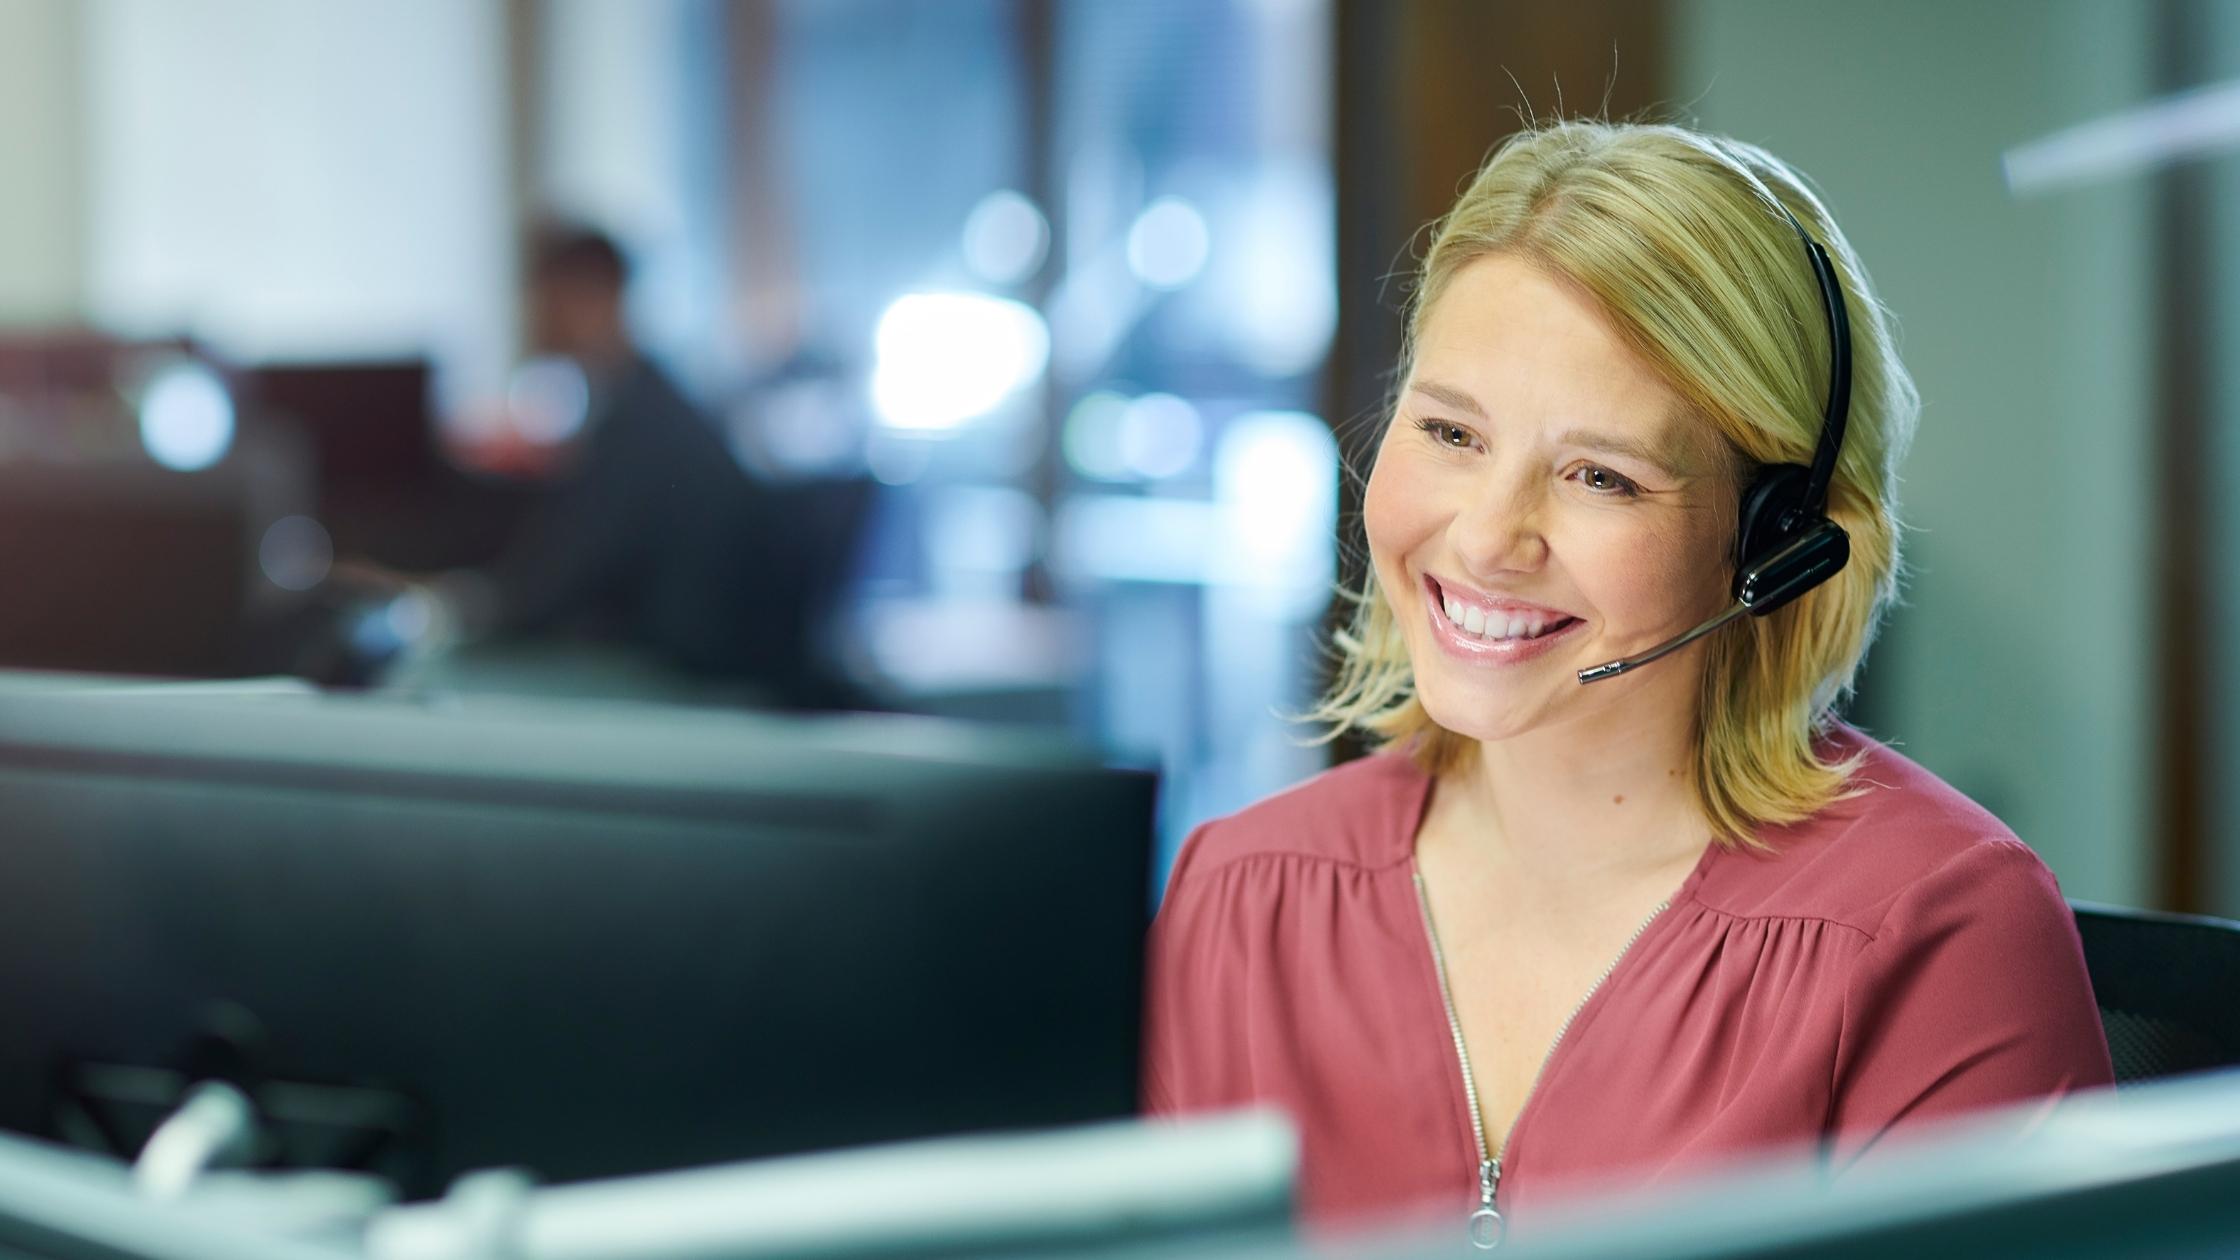 Leaderboard, Call / Contact Center: Definition & Resources